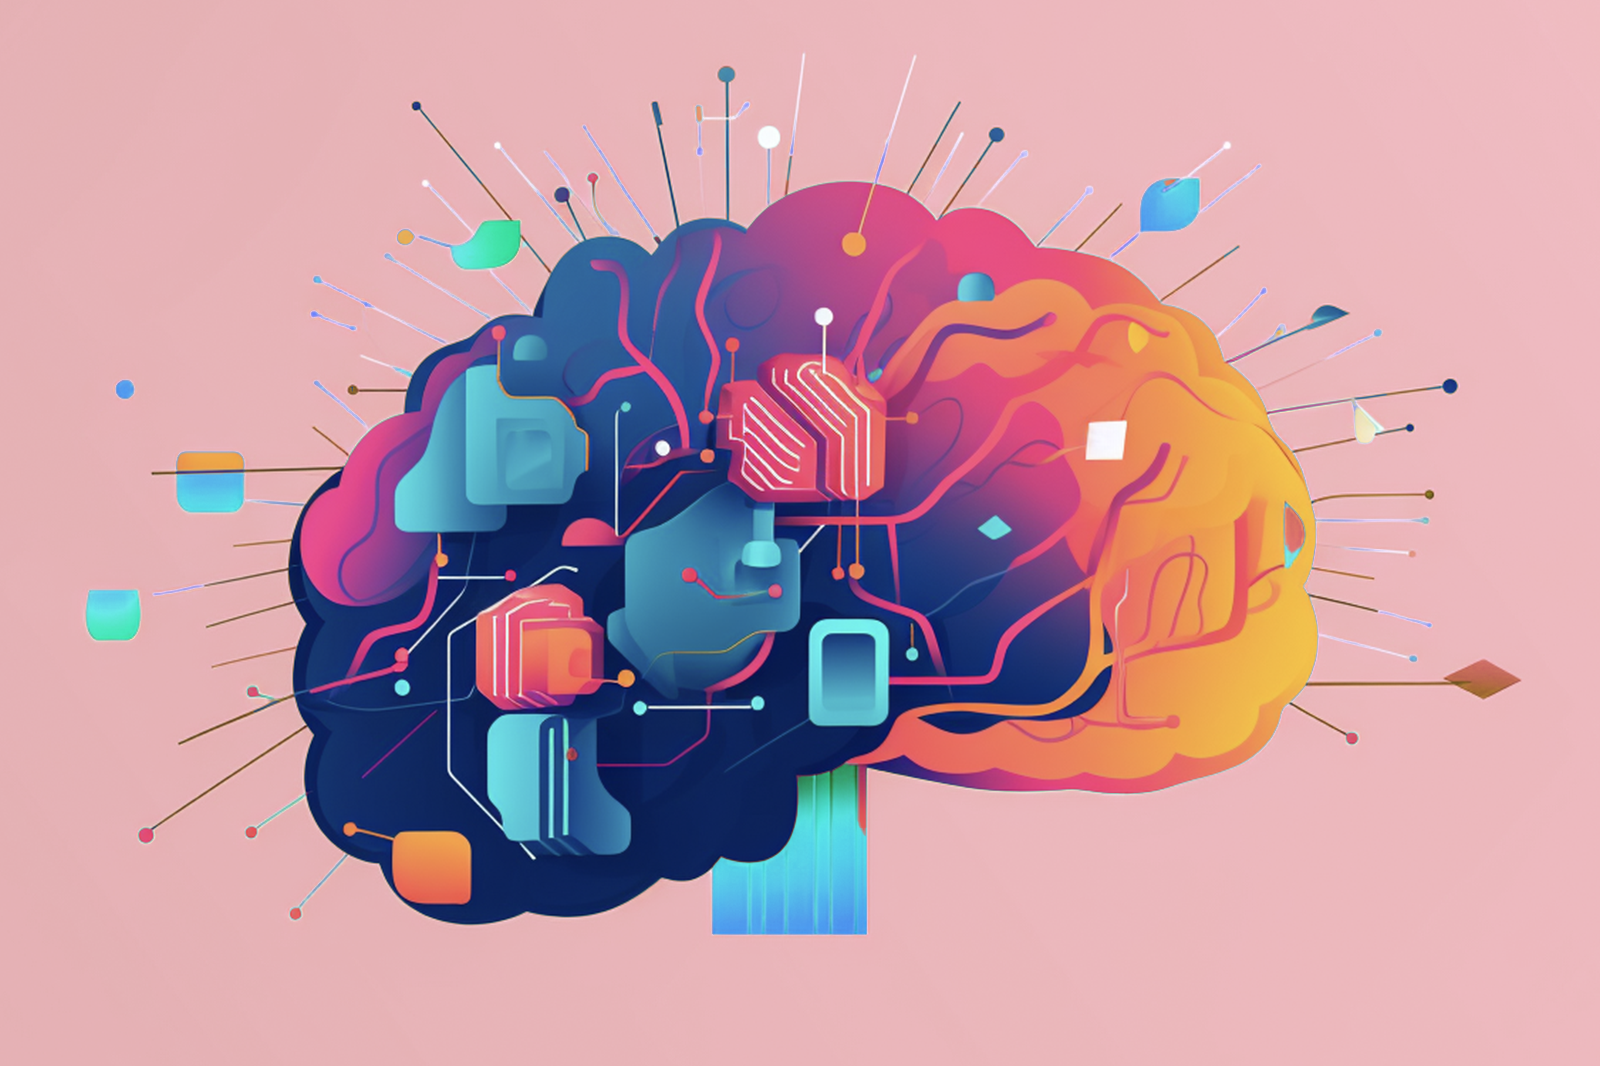 An eye-catching illustration of a vibrant brain against a captivating pink background